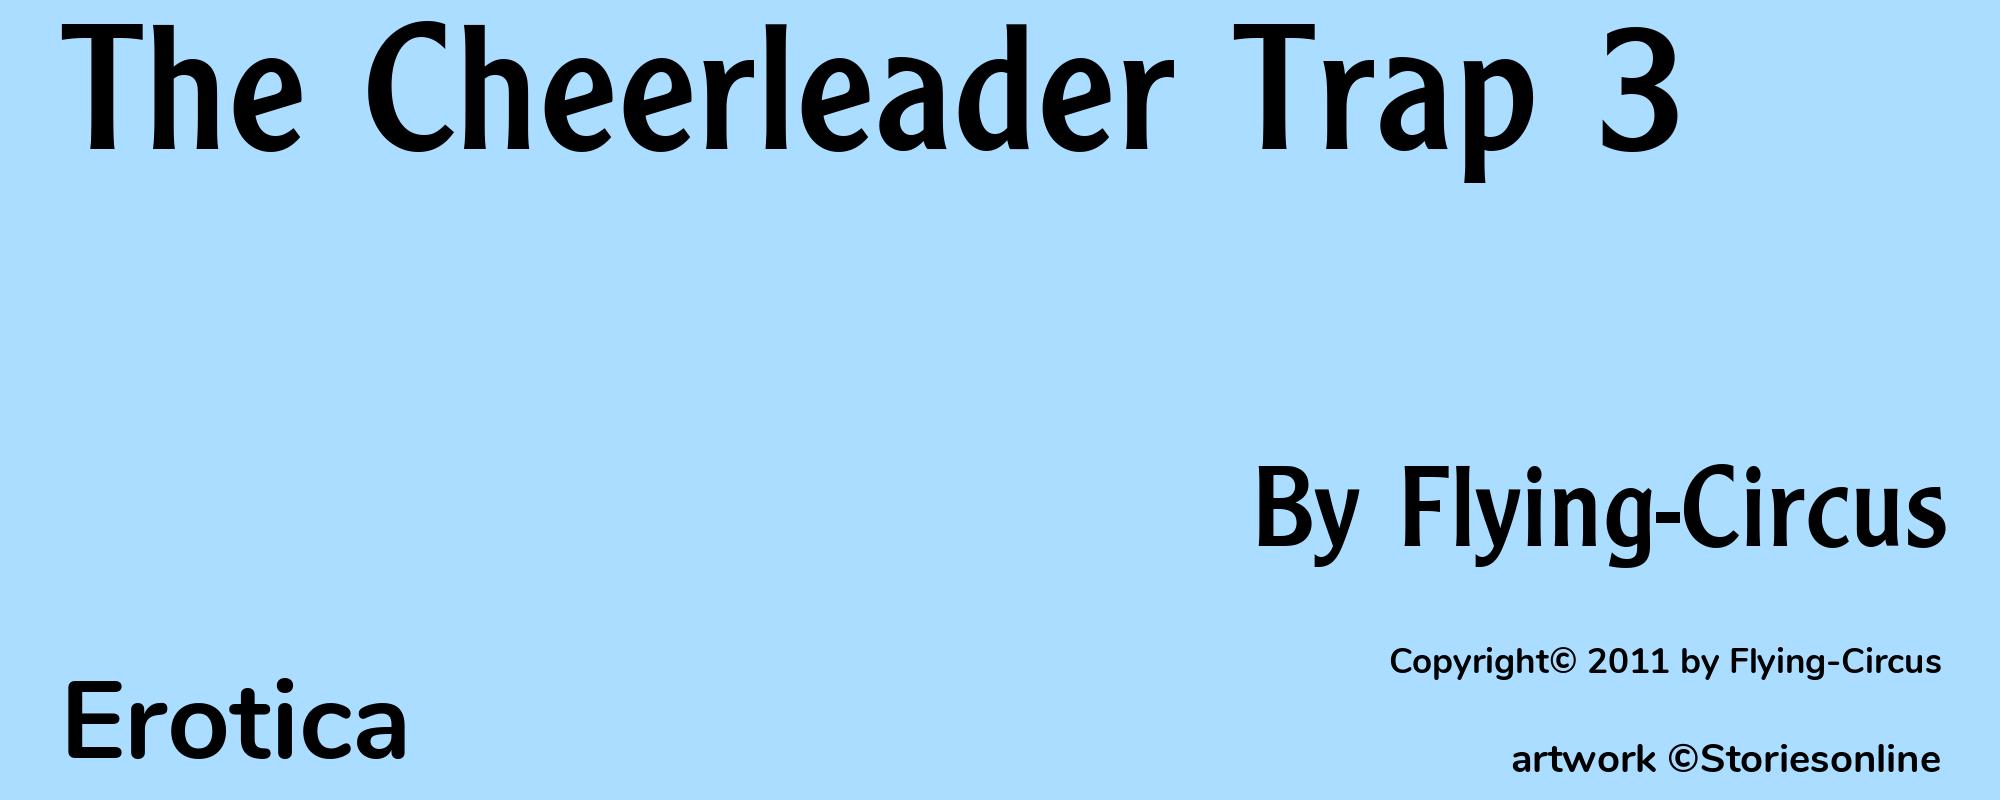 The Cheerleader Trap 3 - Cover